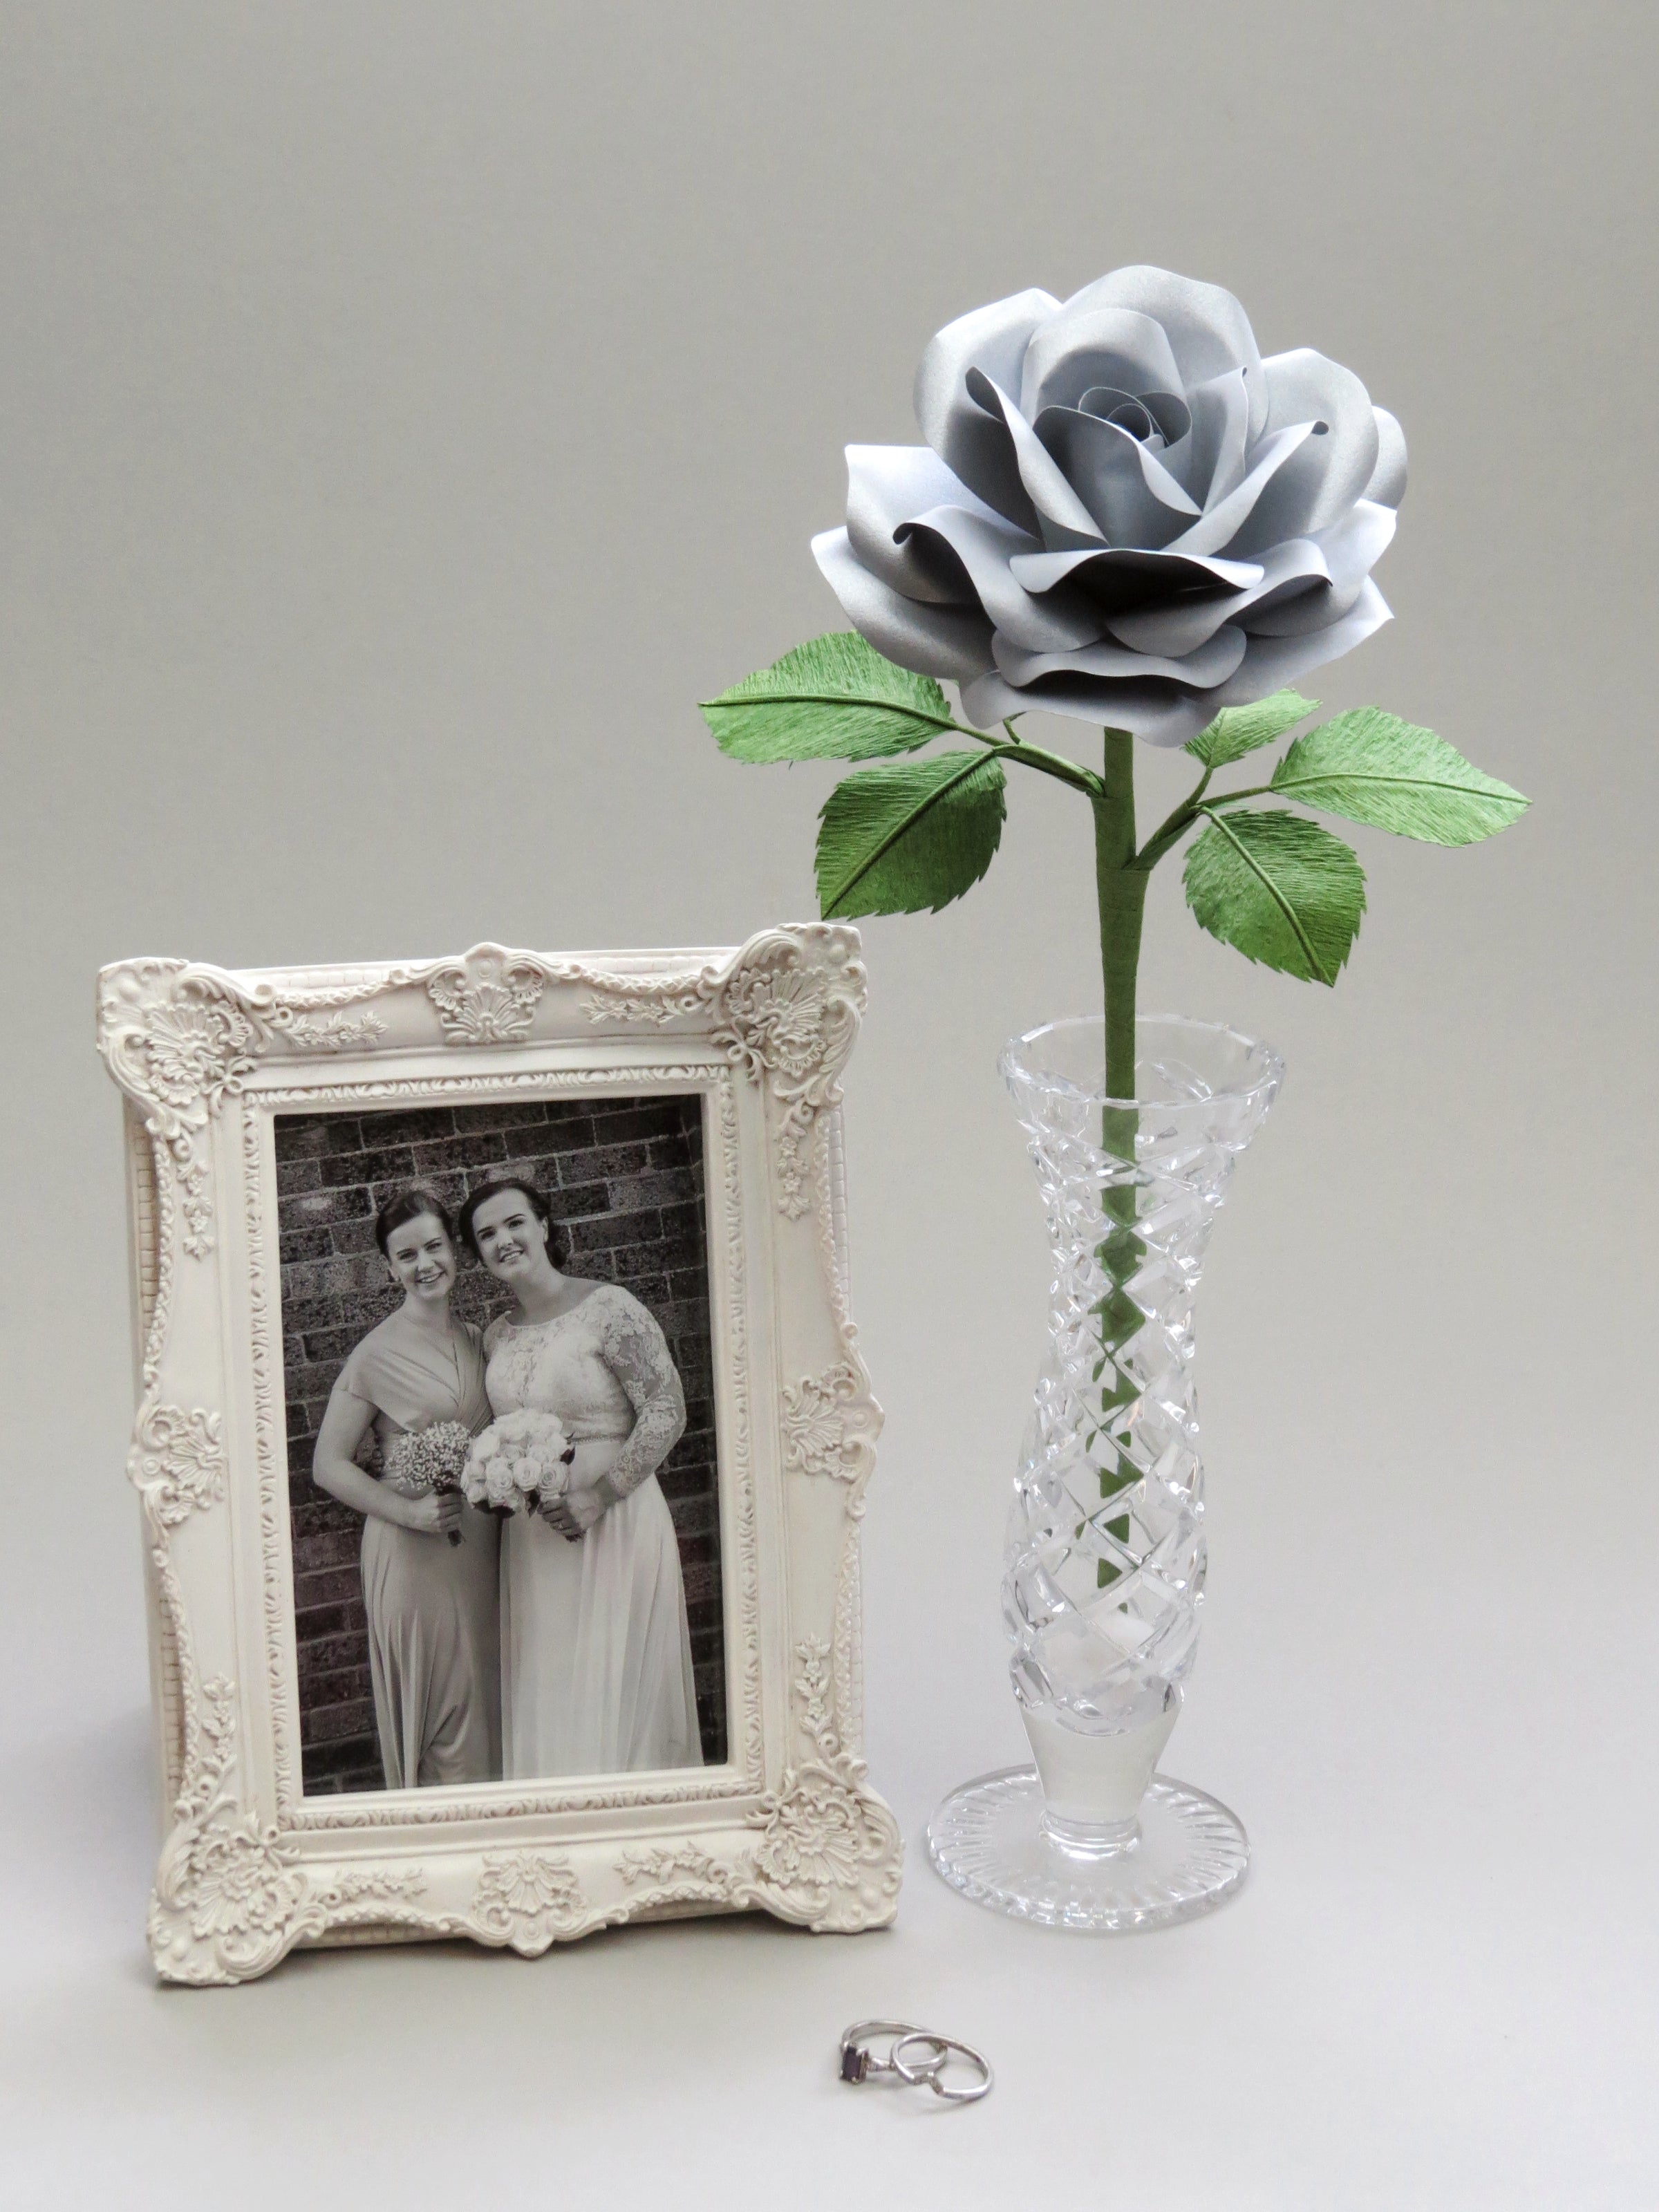 Steel paper rose with six ivy green leaves standing in a slender glass vase with a thick vintage photo frame with a black and white photo of a happy bride and her bridesmaid, and a platinum wedding and engagement ring delicately placed on top of each other nearby